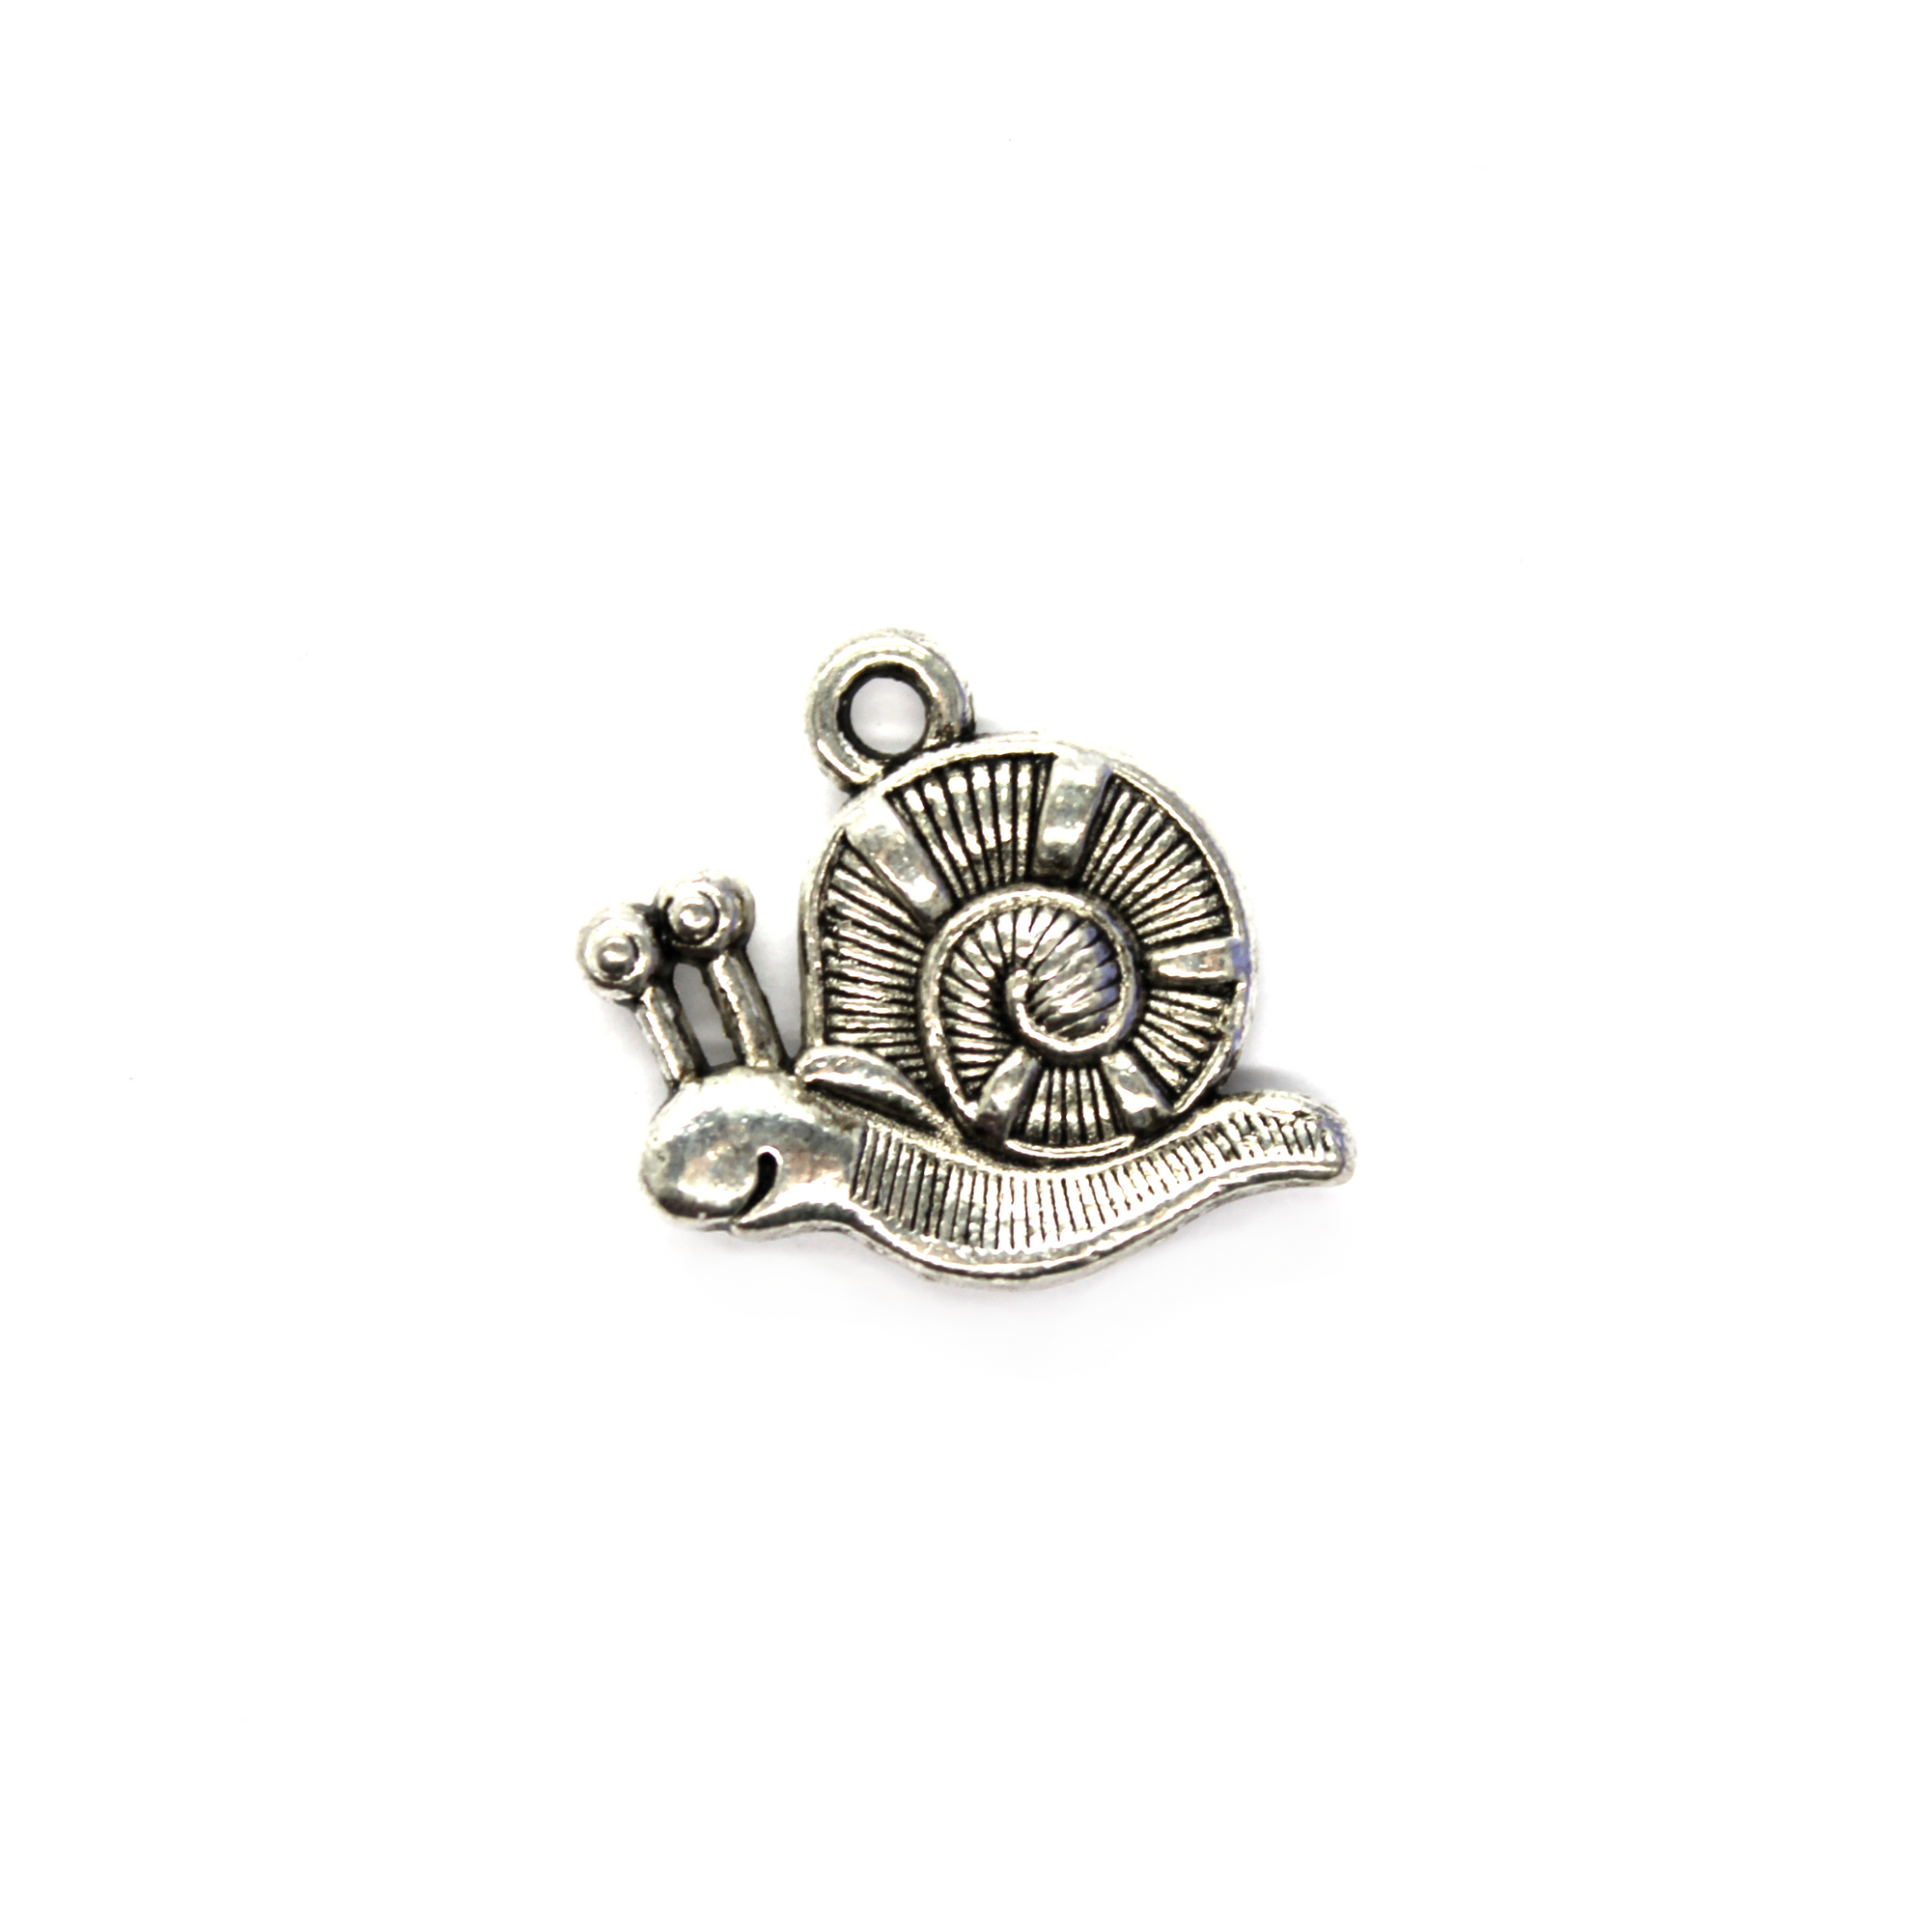 Charms, Smiley Snail, Silver, Alloy, 16mm X 17mm, Sold Per pkg of 6